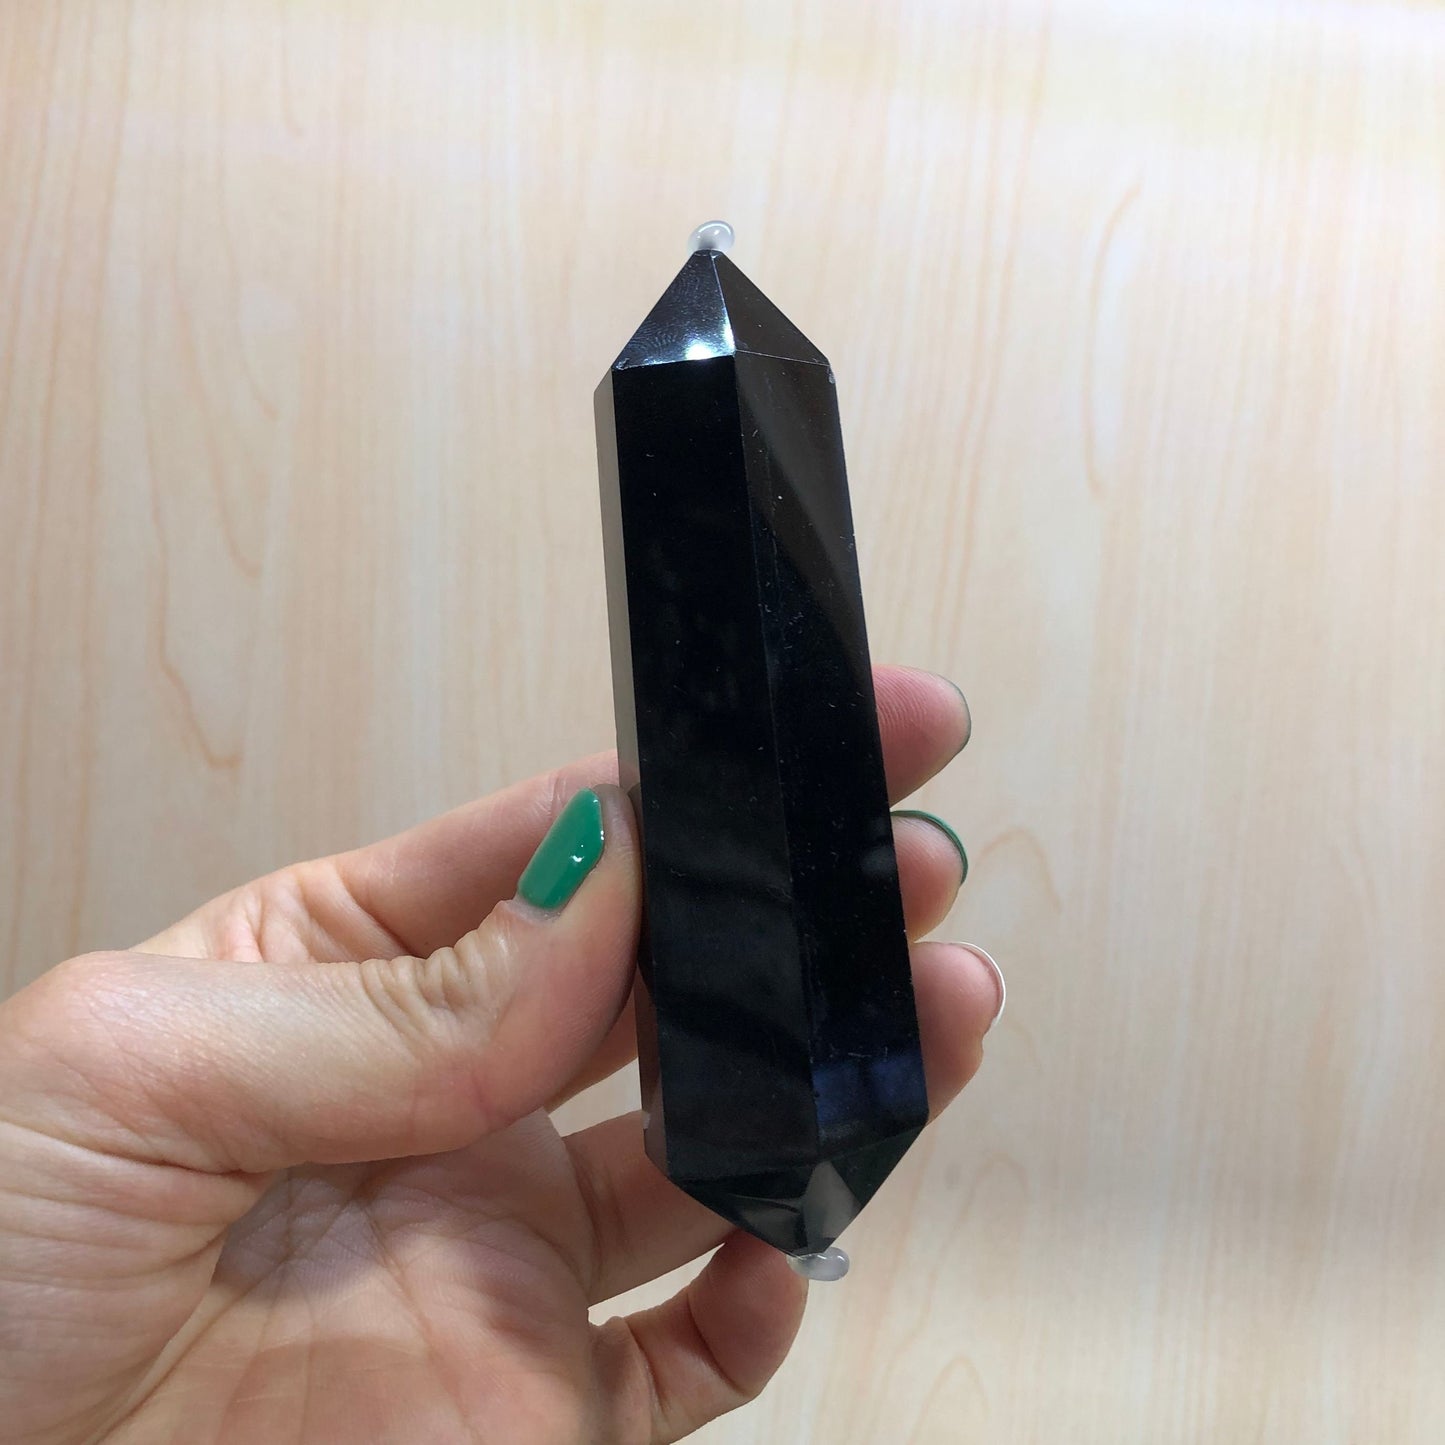 Natural Obsidian Crystal Wand with Hexagonal Points - Ideal for Healing, Reiki, Home Decor and DIY Gift Ideas